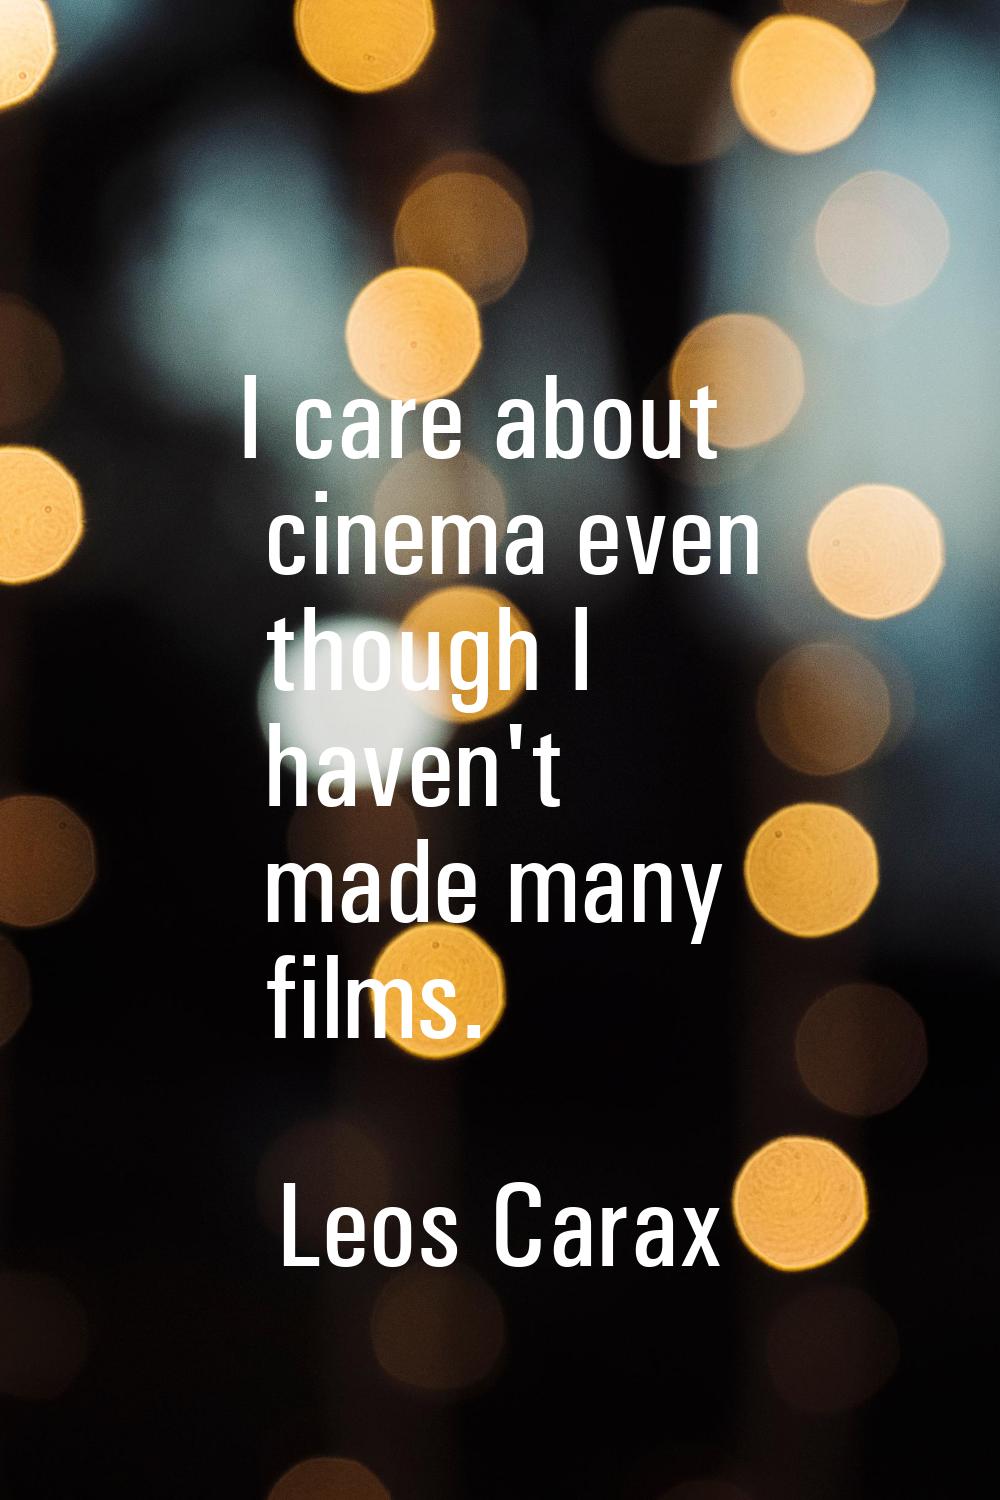 I care about cinema even though I haven't made many films.